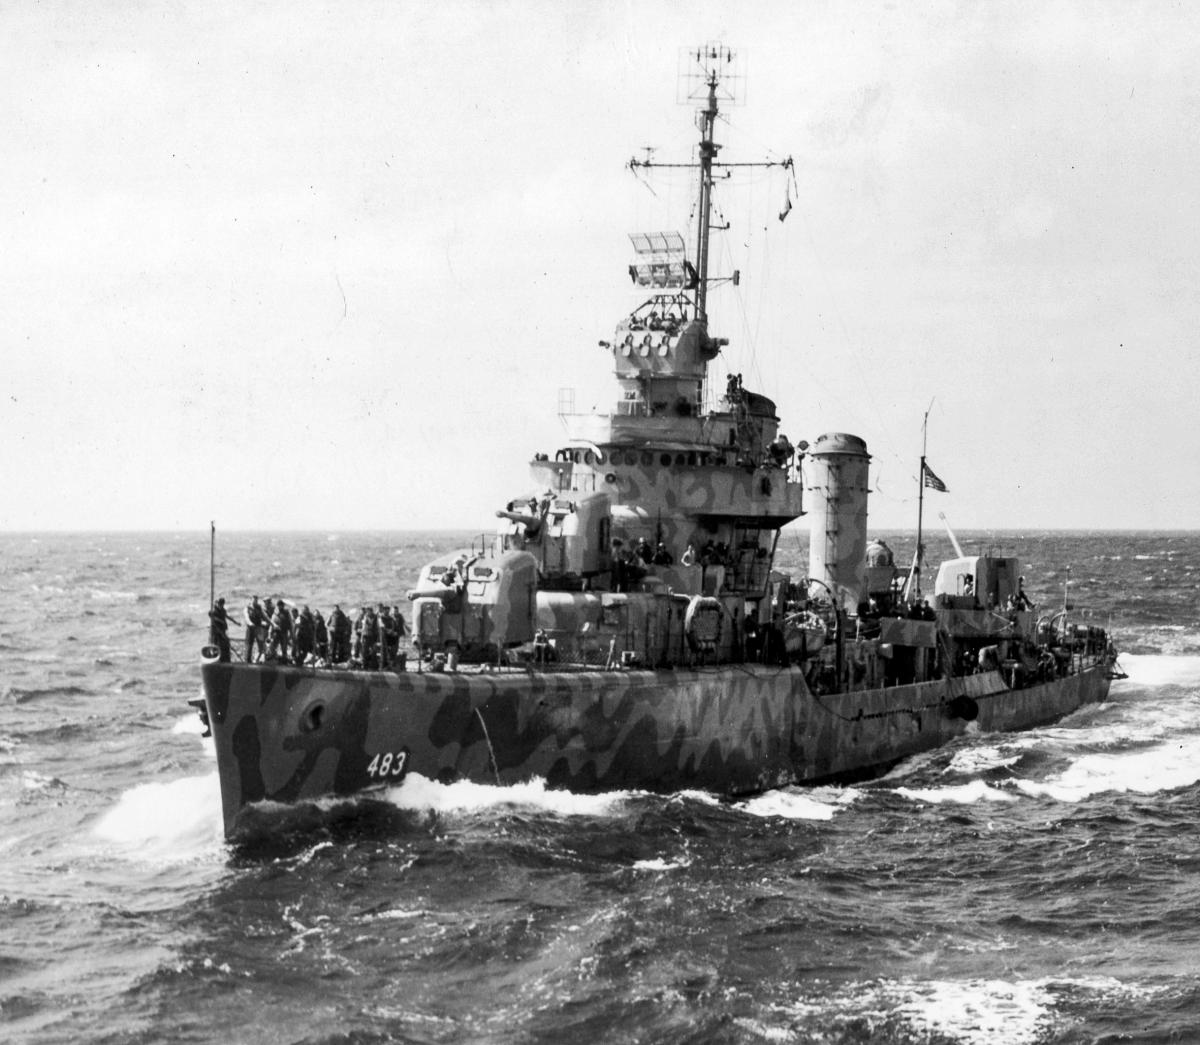 Surface port bow view of the USS Aaron Ward (DD-483) underway at sea